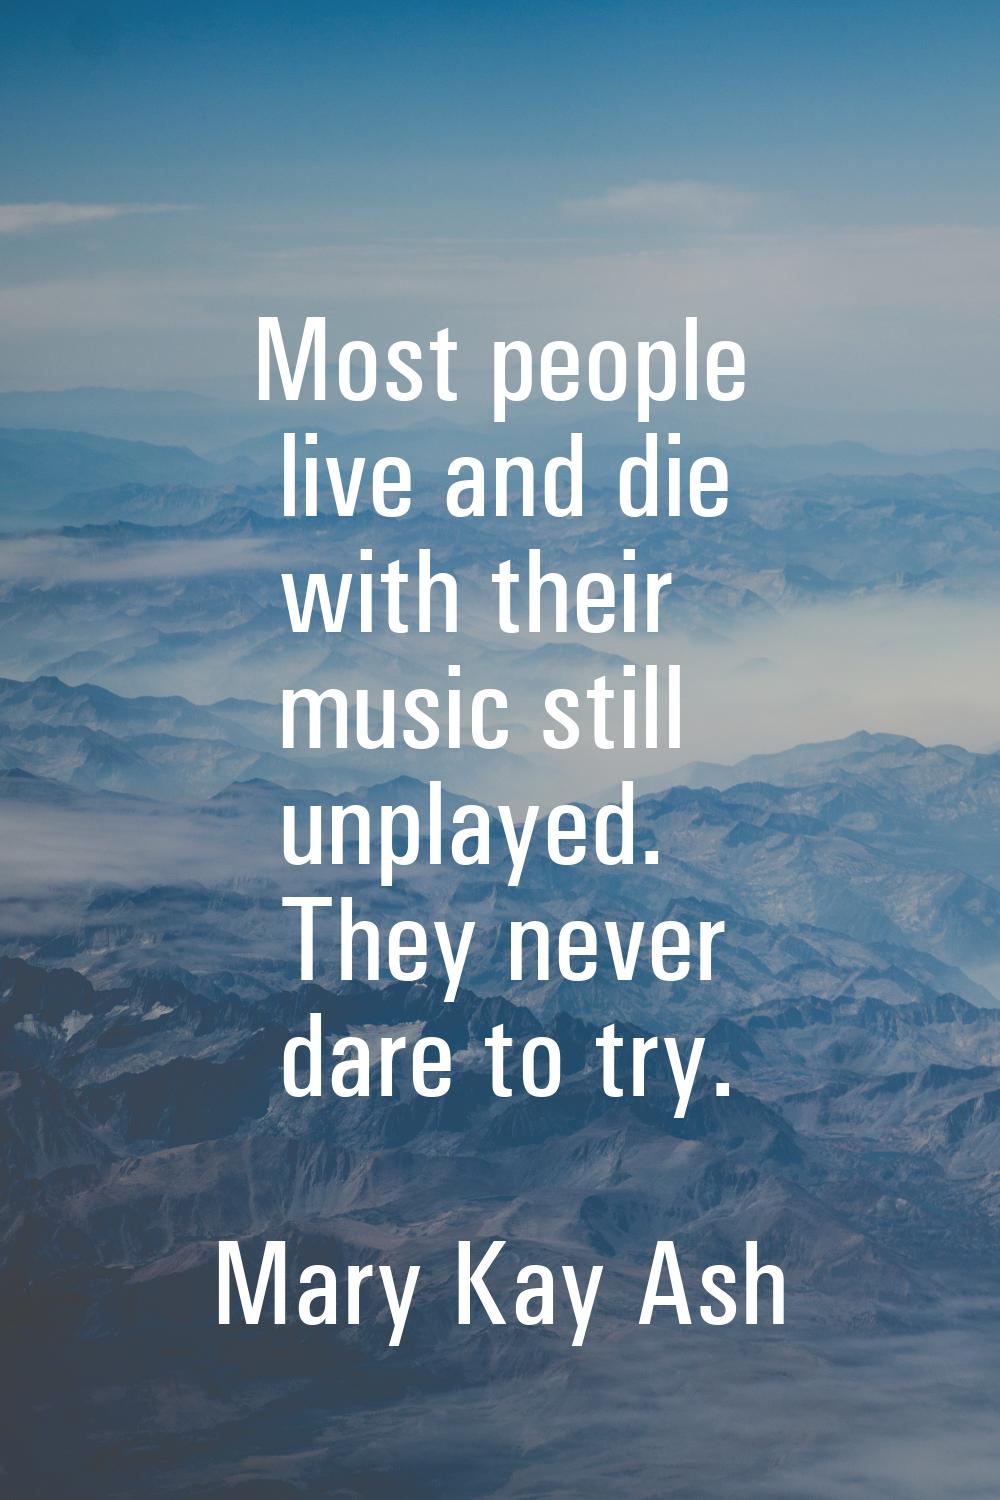 Most people live and die with their music still unplayed. They never dare to try.